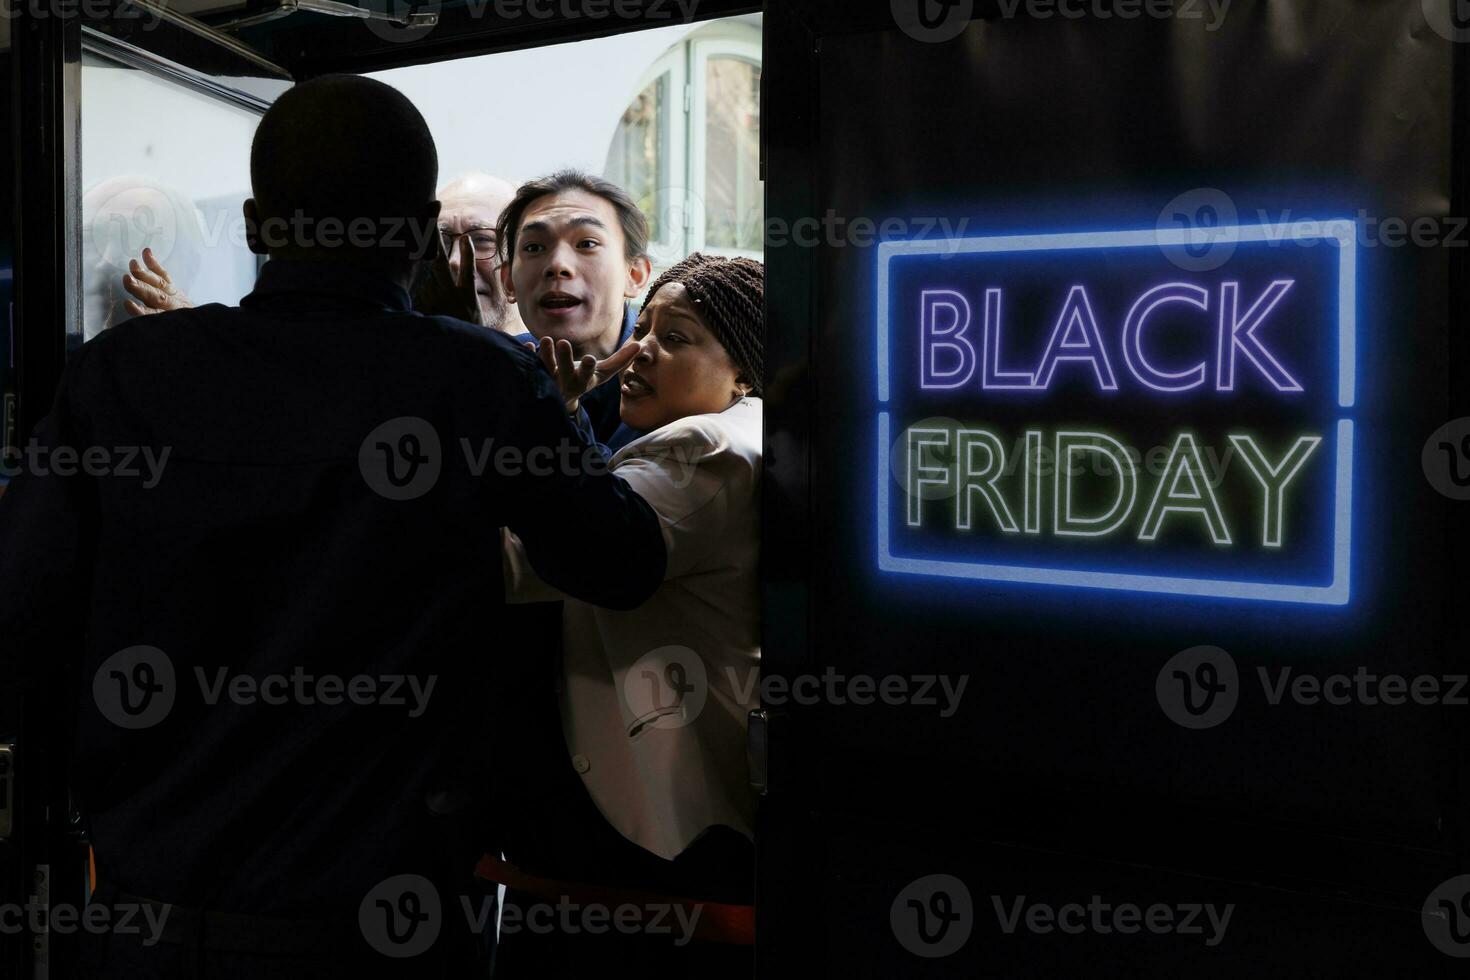 People going crazy for Black Friday deals. Shopping mall security officer managing crowd control, pushing back anxious mad shoppers trying to break into retail store before it opens photo